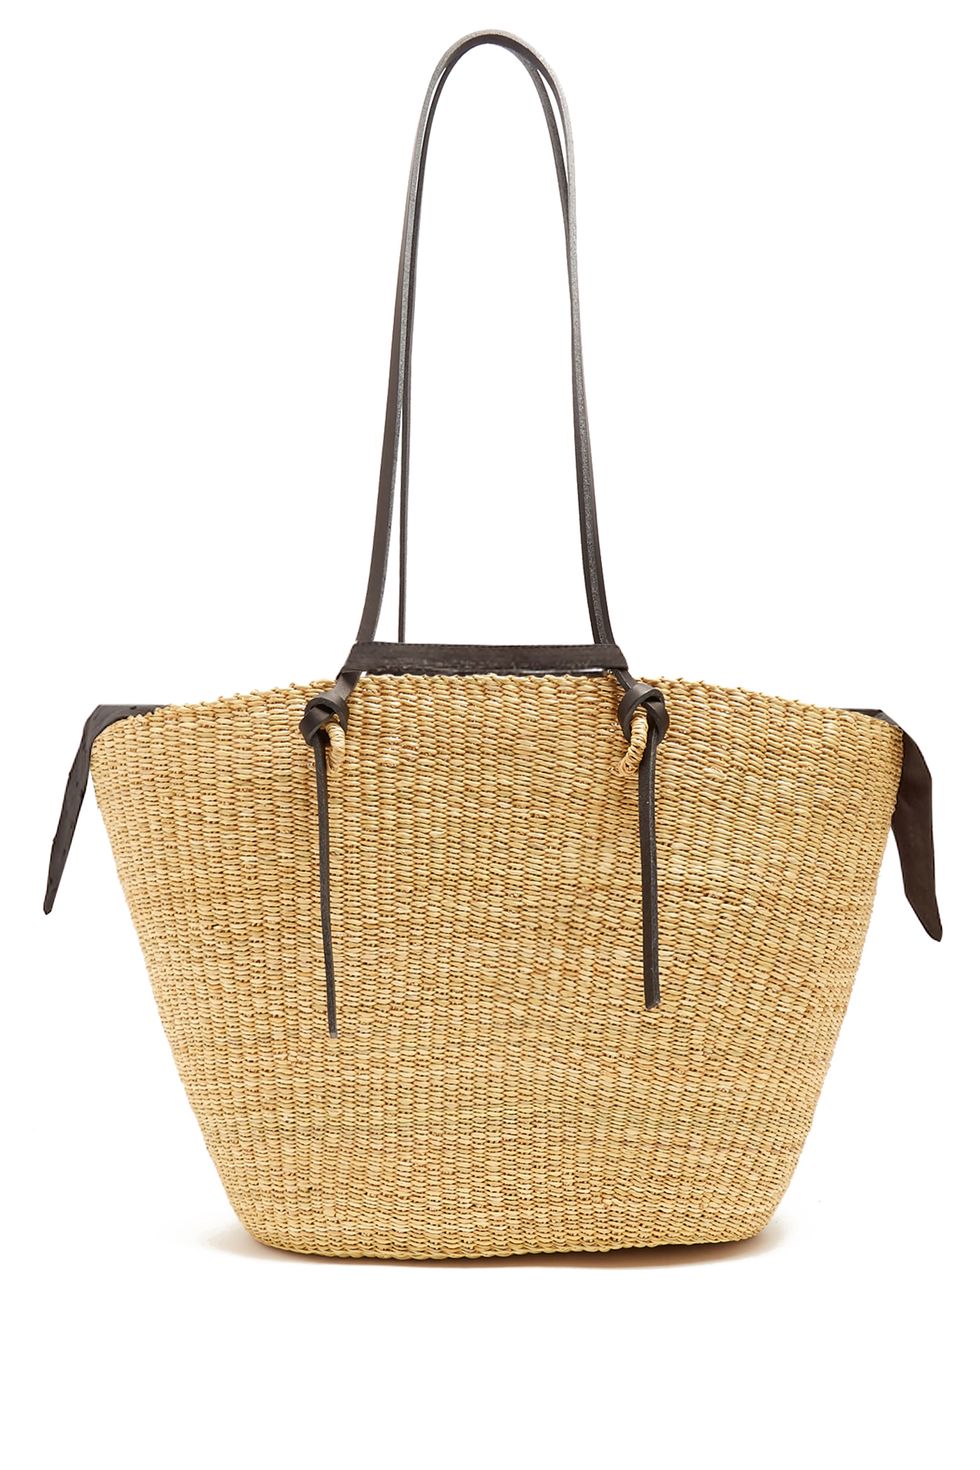 Brown, Product, Bag, Fashion accessory, Shoulder bag, Wicker, Luggage and bags, Home accessories, Beige, Tan, 